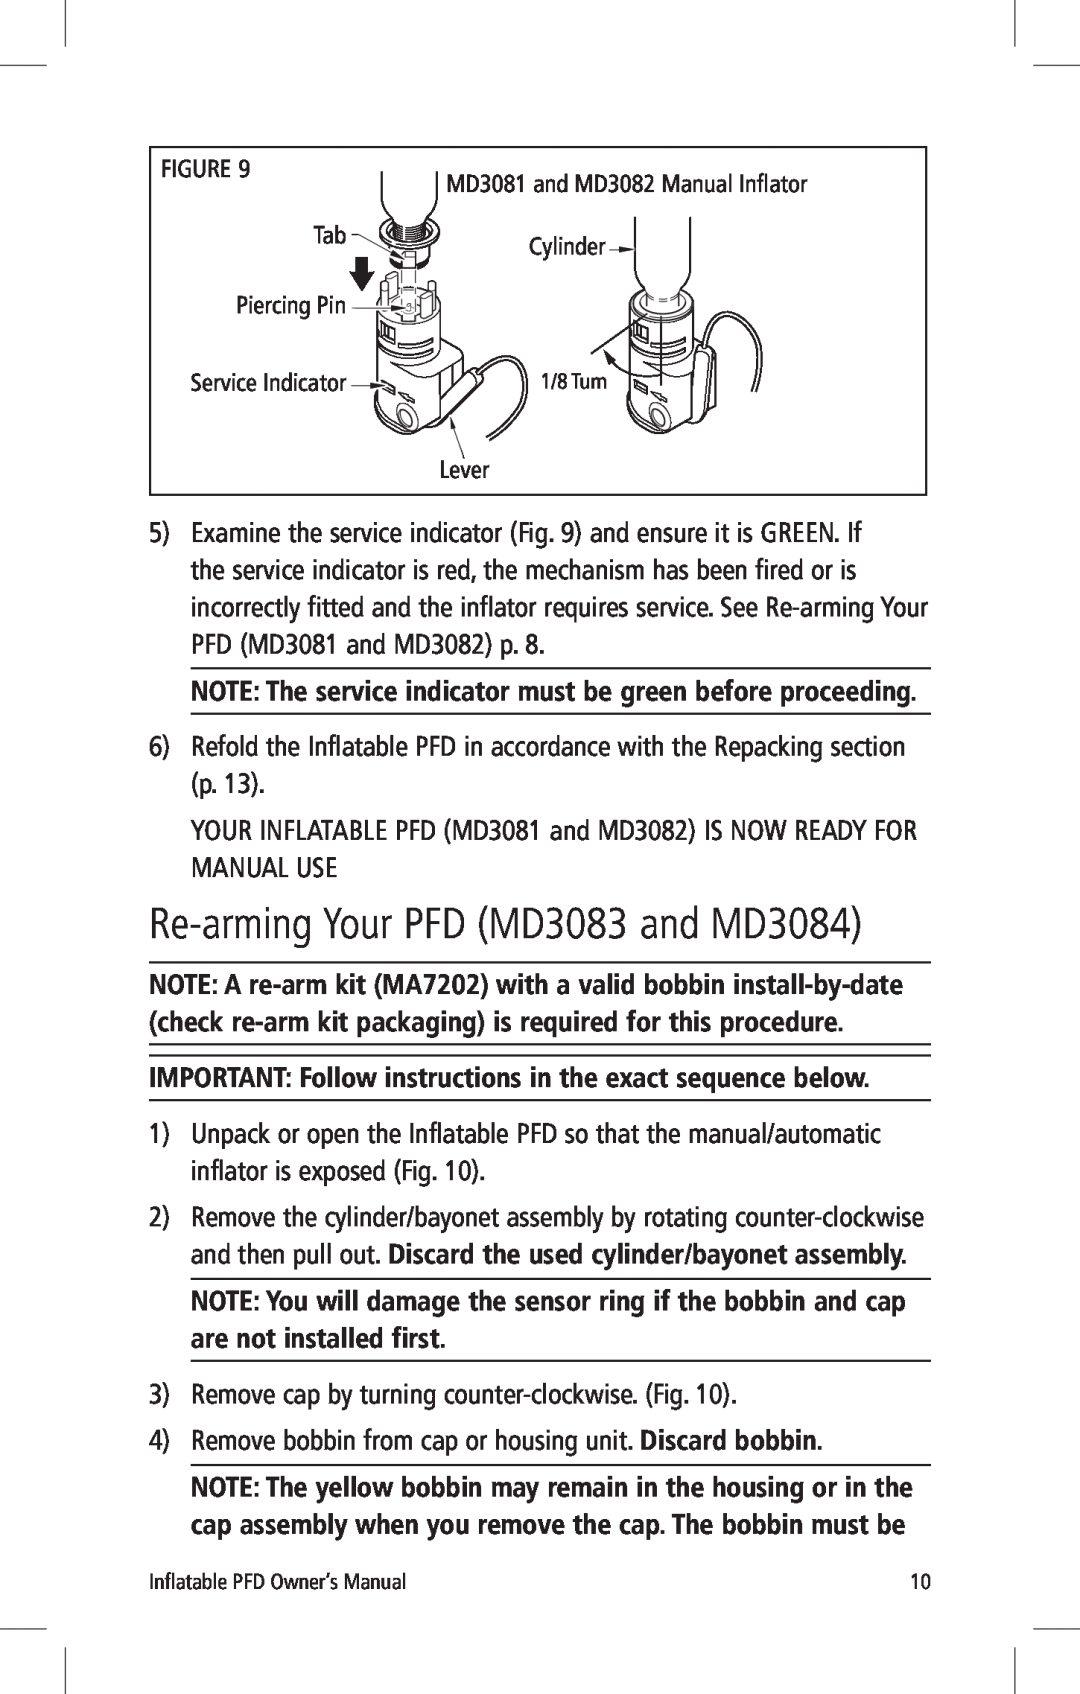 Mustang Survival manual Re-arming Your PFD MD3083 and MD3084, NOTE The service indicator must be green before proceeding 